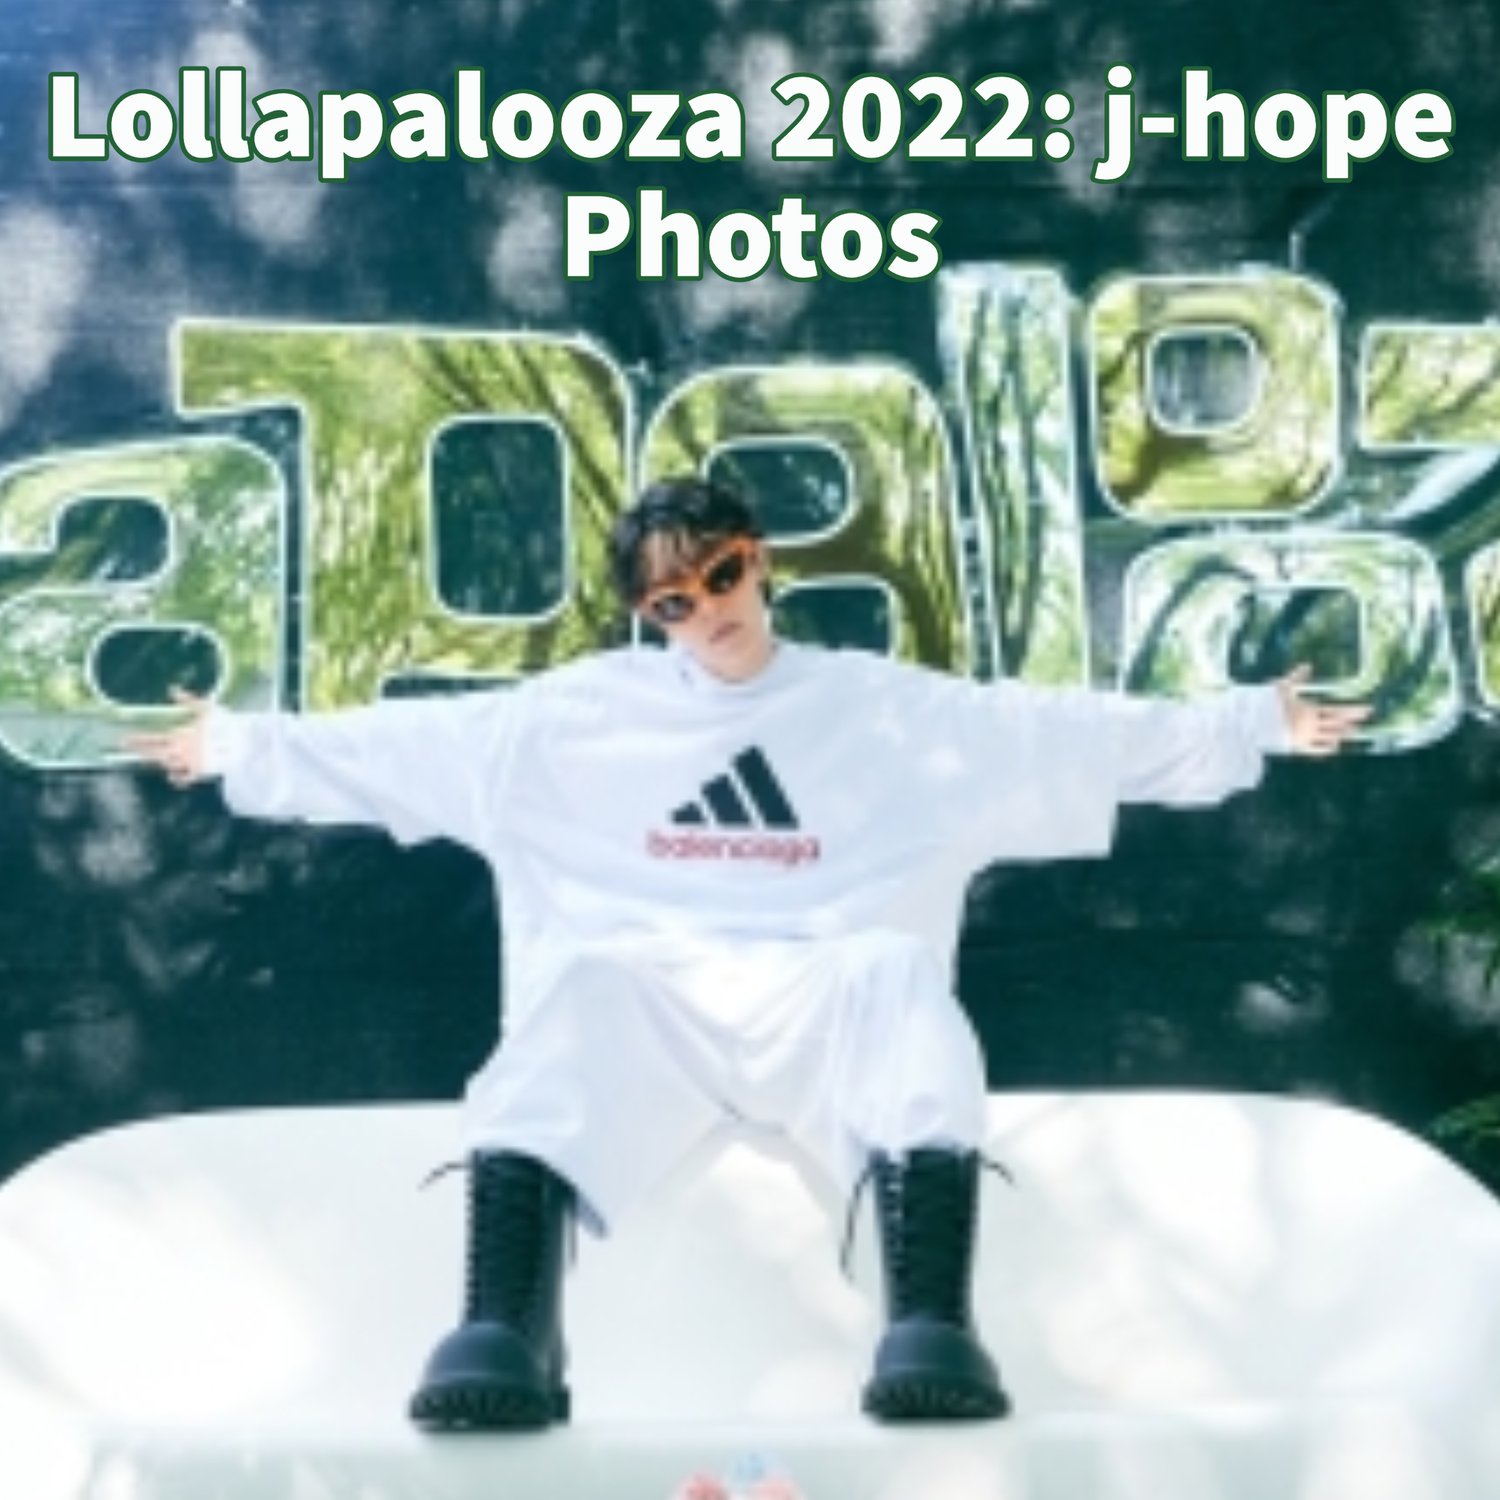 Photos from the festival held at J Hope LOLLAPALOOZA 01082022